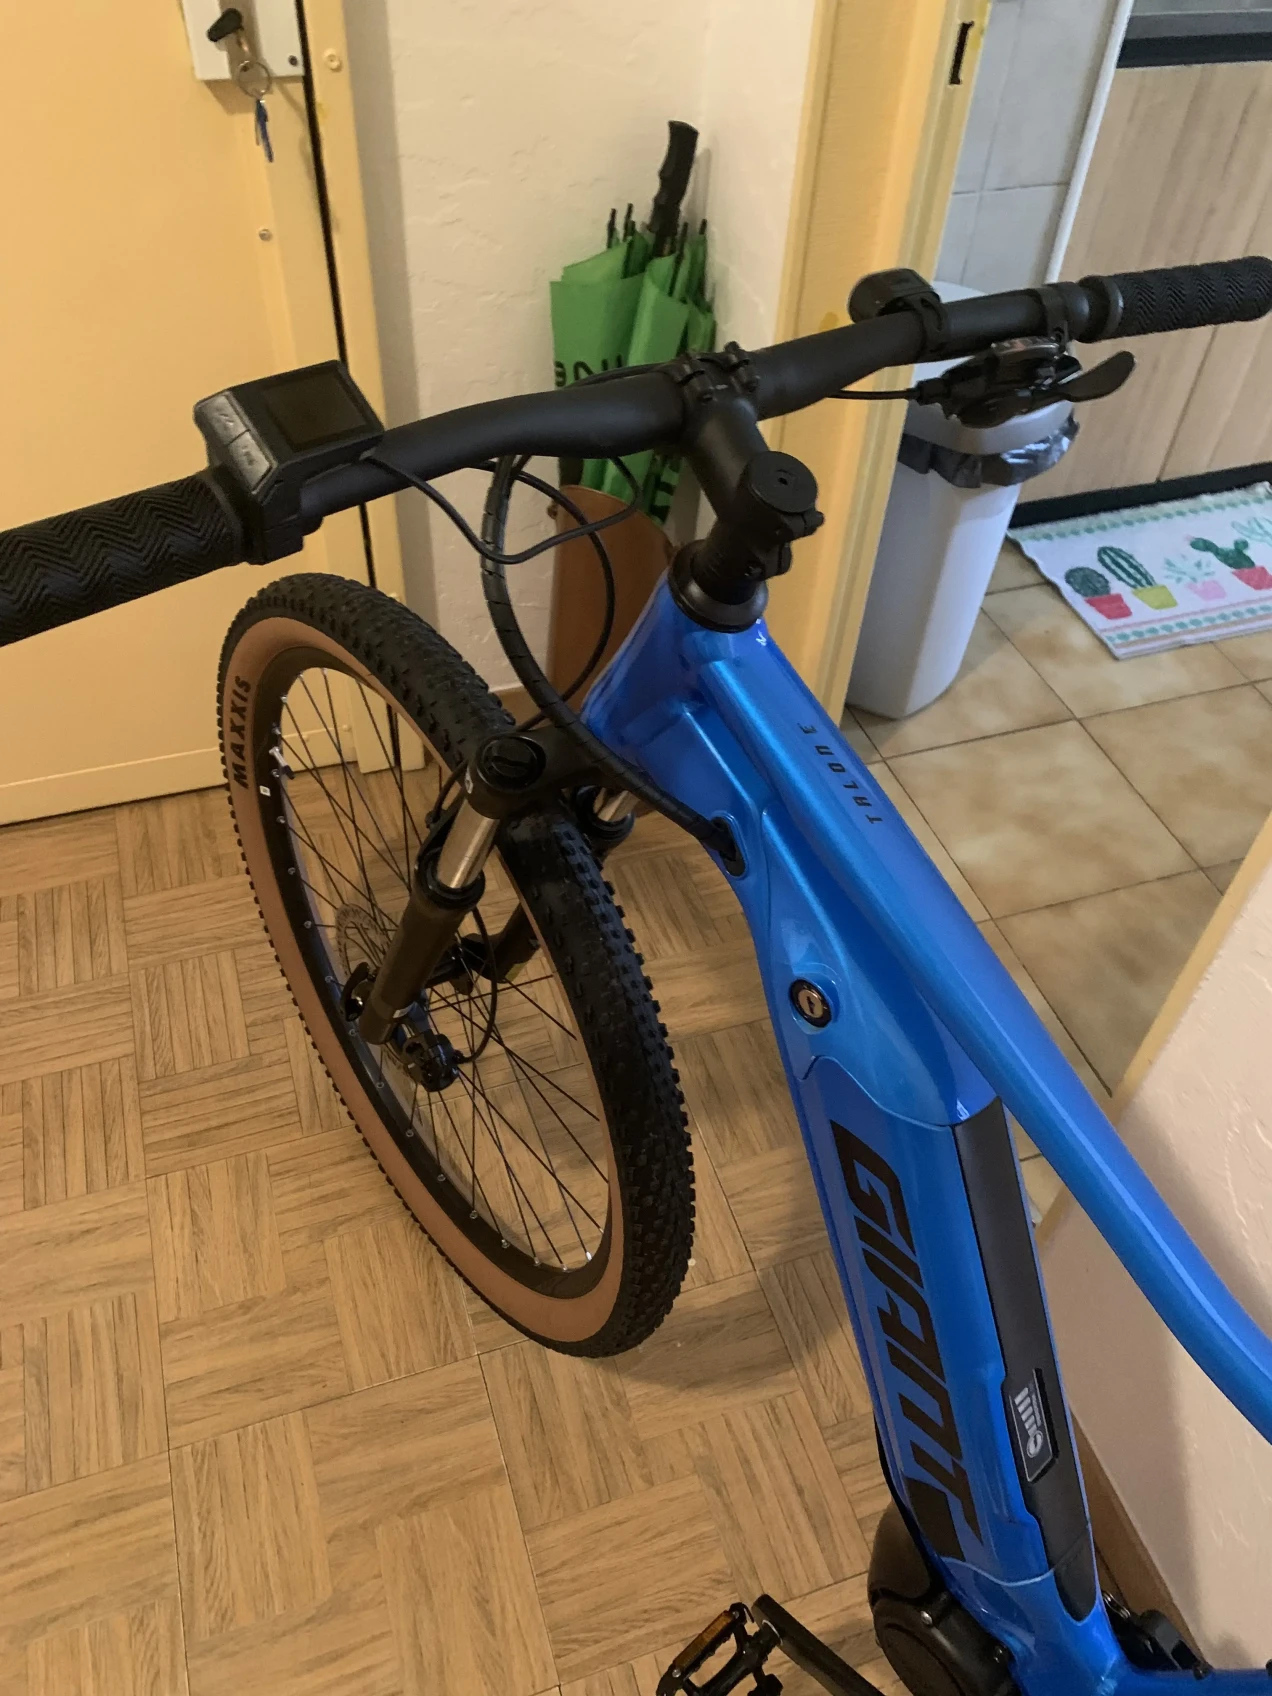 Giant Talon E+ 2 used in 45 cm buycycle